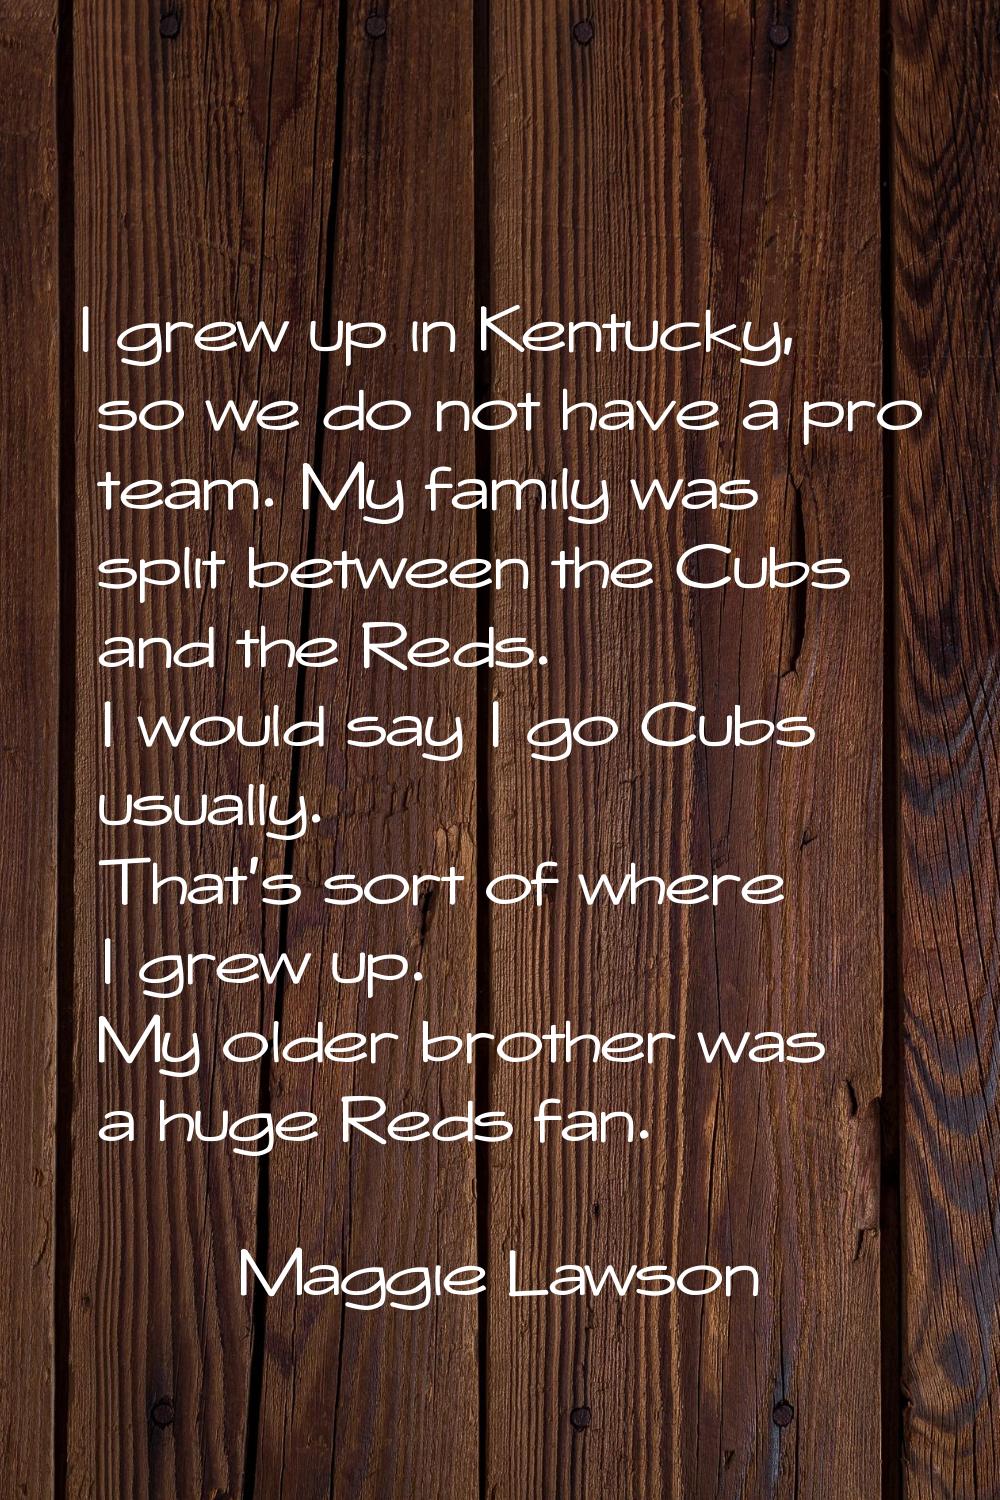 I grew up in Kentucky, so we do not have a pro team. My family was split between the Cubs and the R